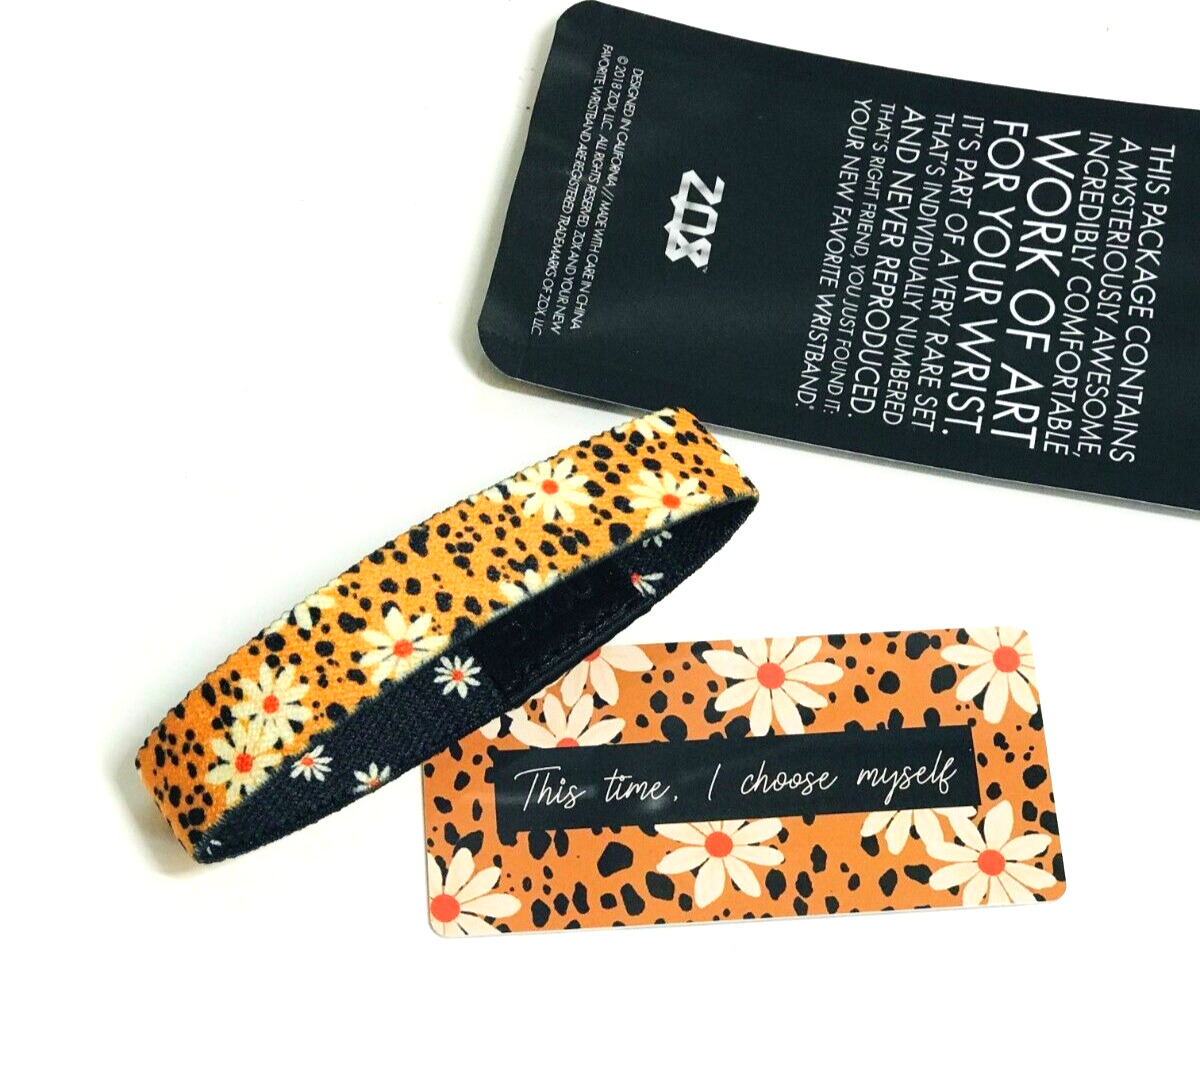 ZOX **THIS TIME I CHOOSE MYSELF** Silver Single Mystery med NIP Wristband w/Card